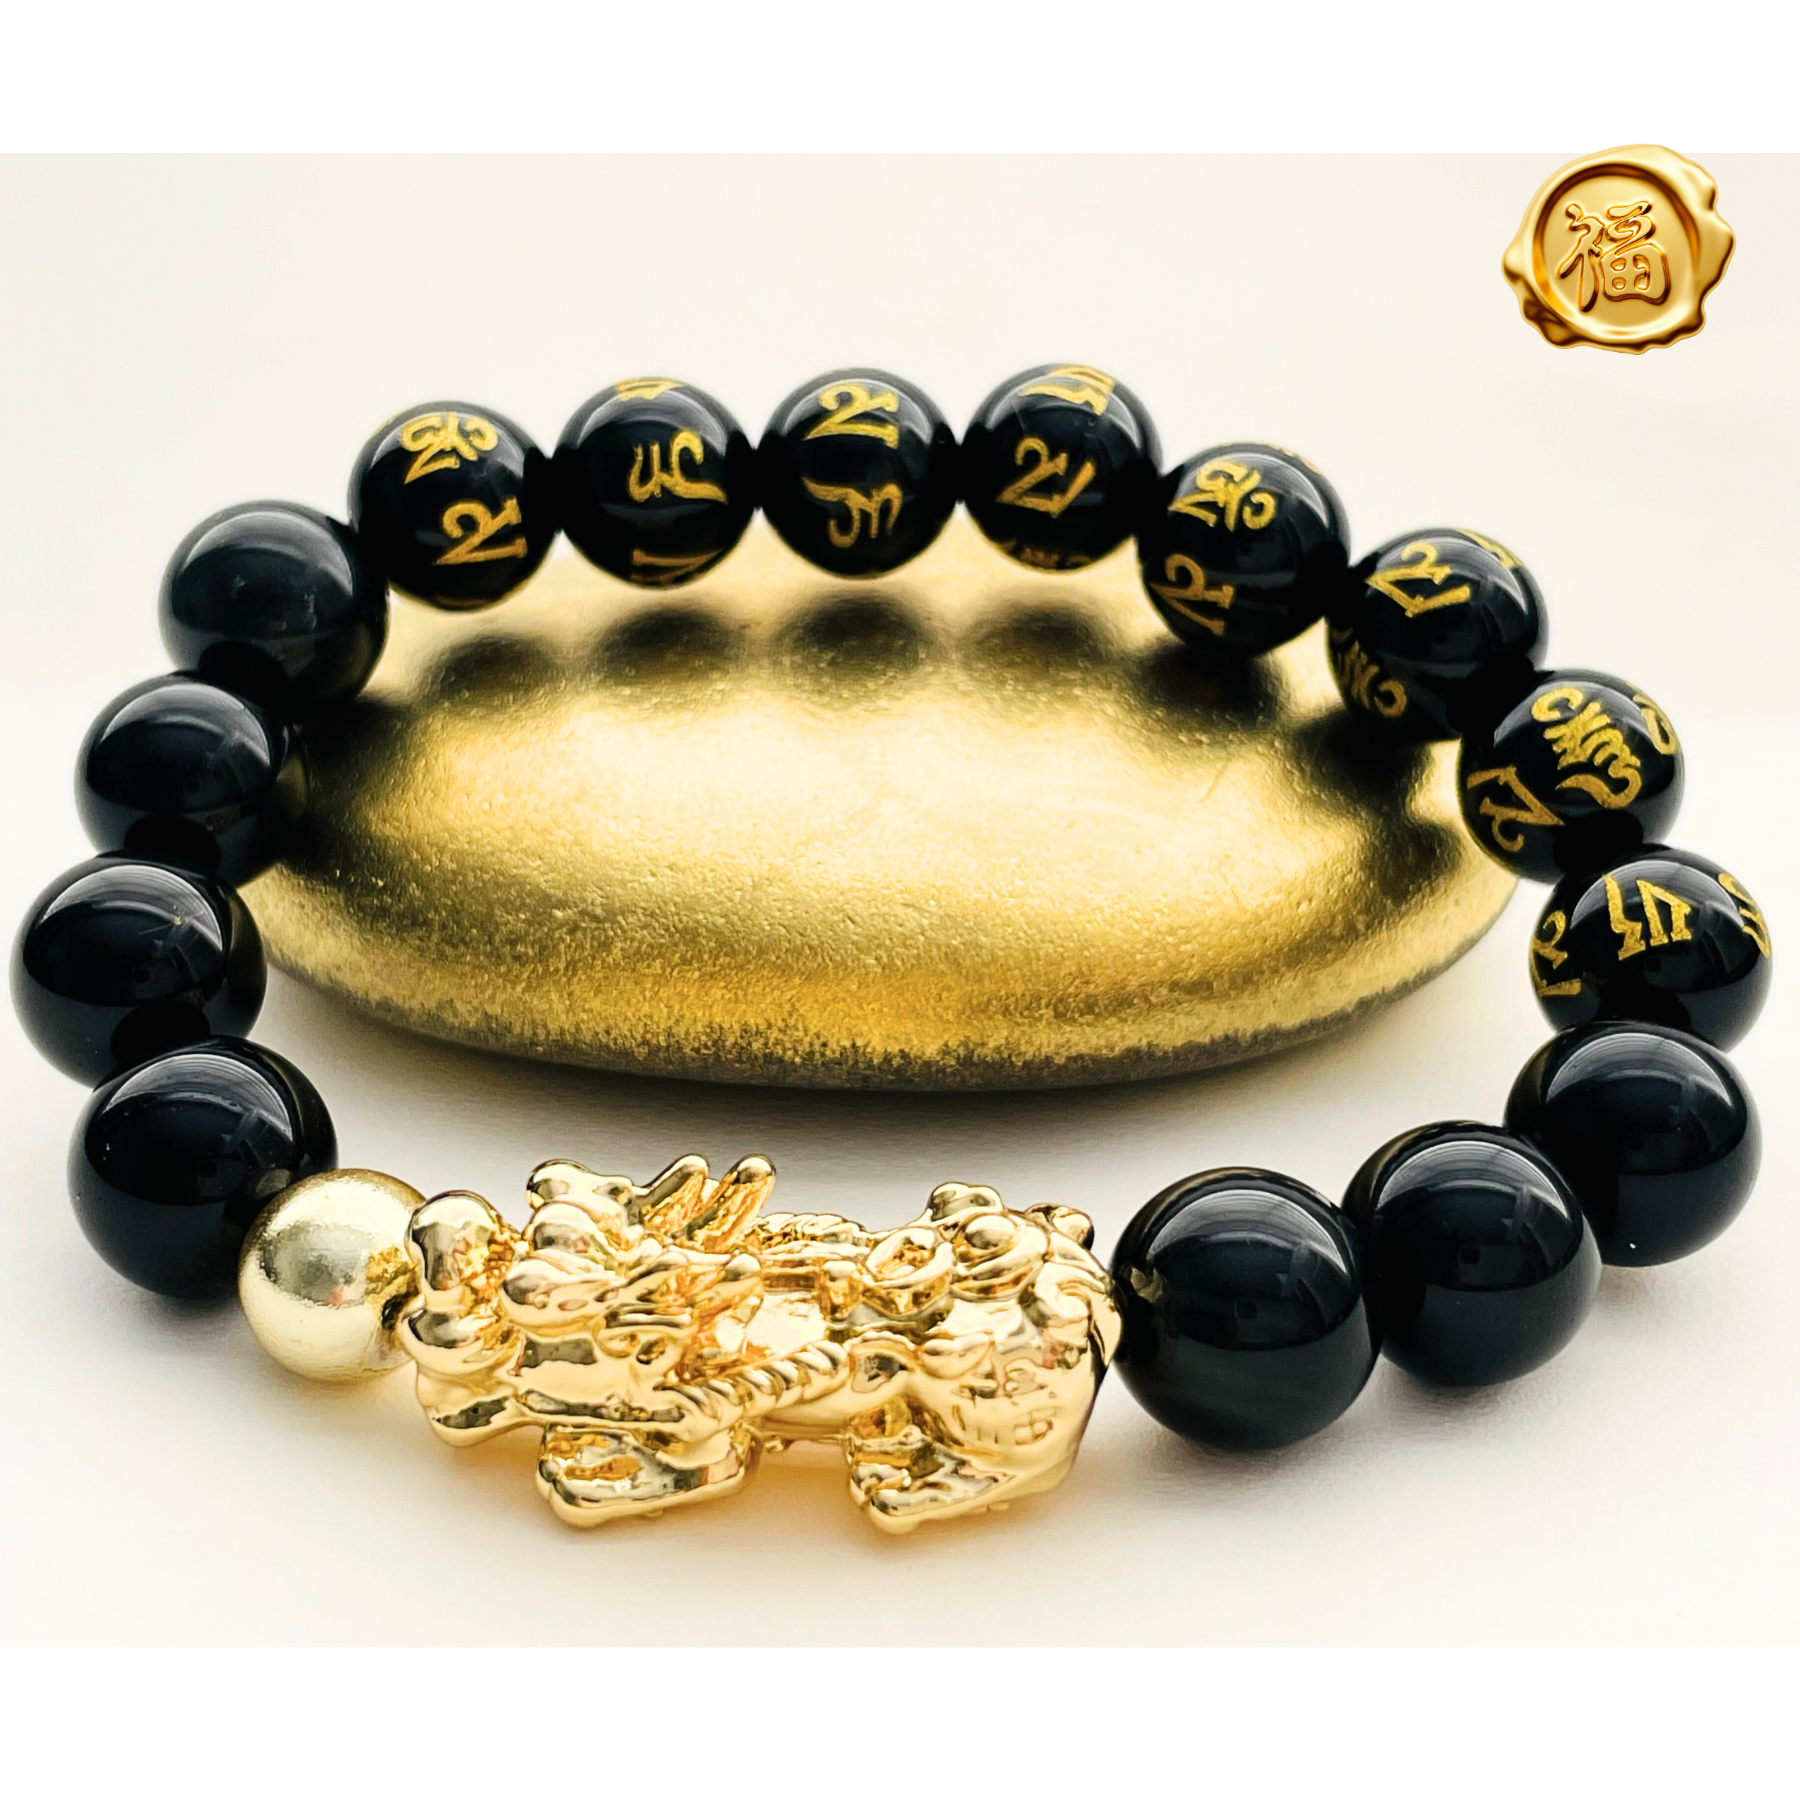 Benefits of Feng Shui Bracelets: Do They Really Work? - FengShuiNexus